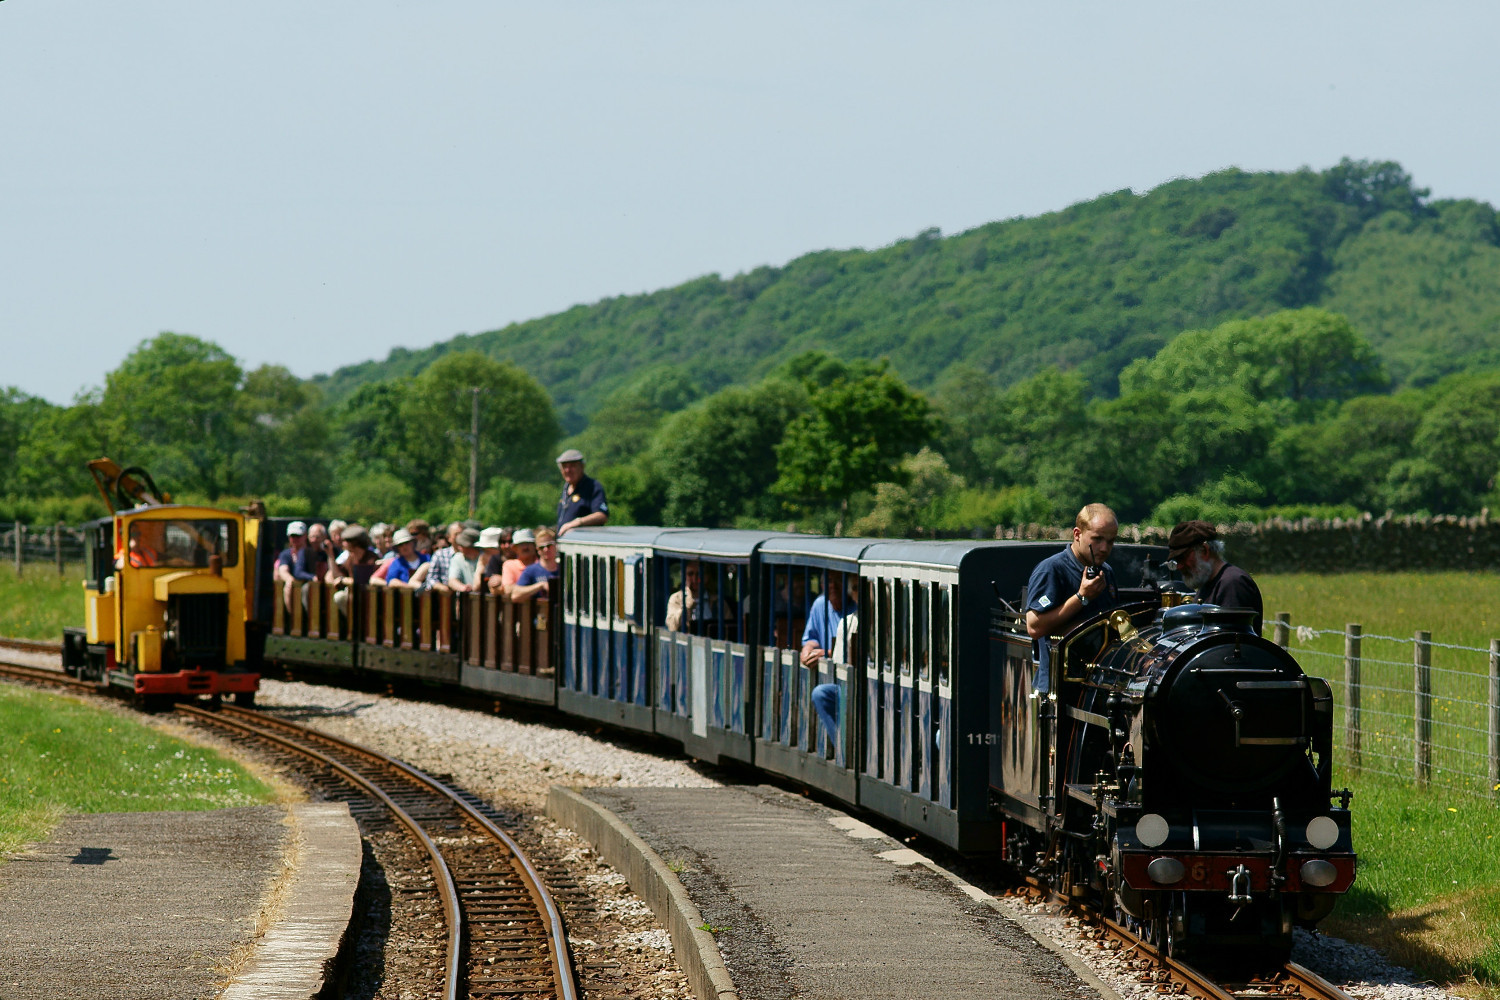 A locomotive arrives at Irton Road on the Ravenglass and Eskdale Railway. Image by Peter Trimming / CC BY 2.0